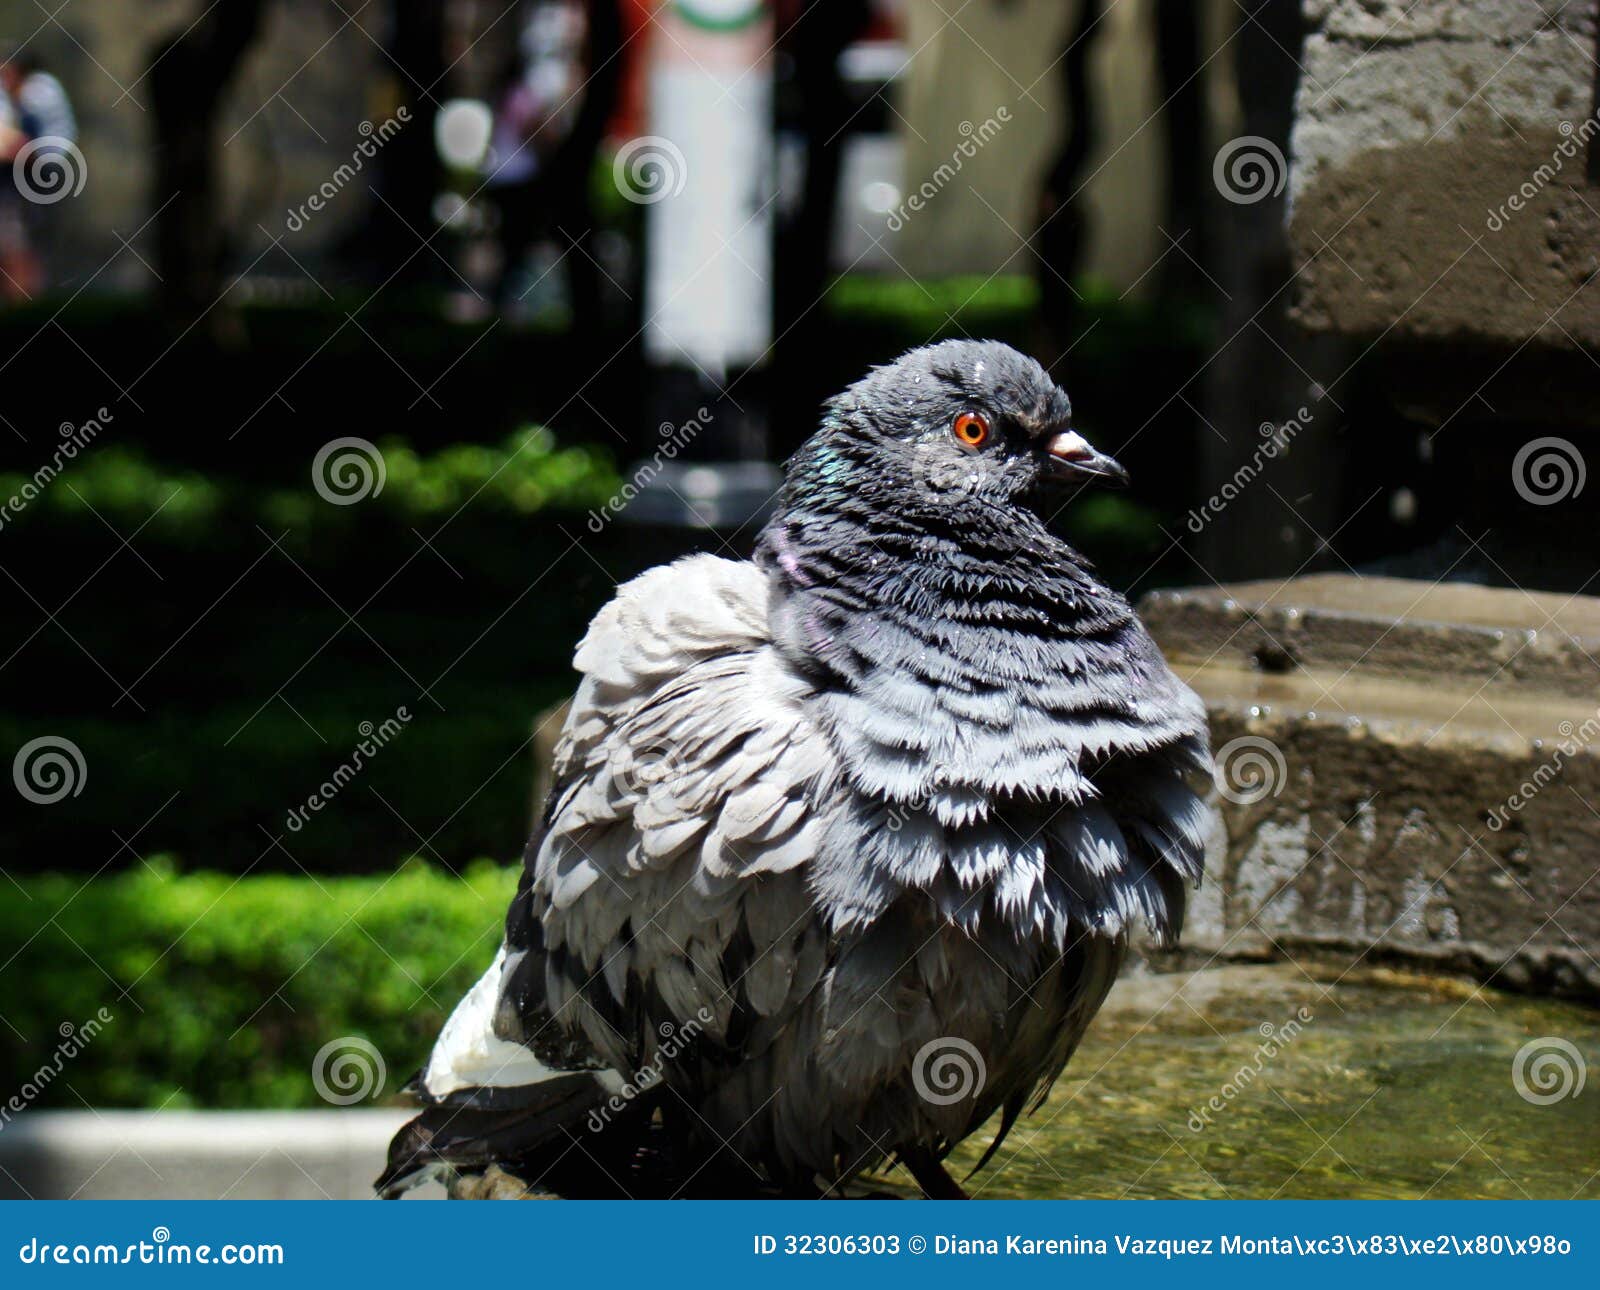  - chillin-fun-bath-wet-fluffy-pidgeon-out-side-fountain-taking-nice-32306303